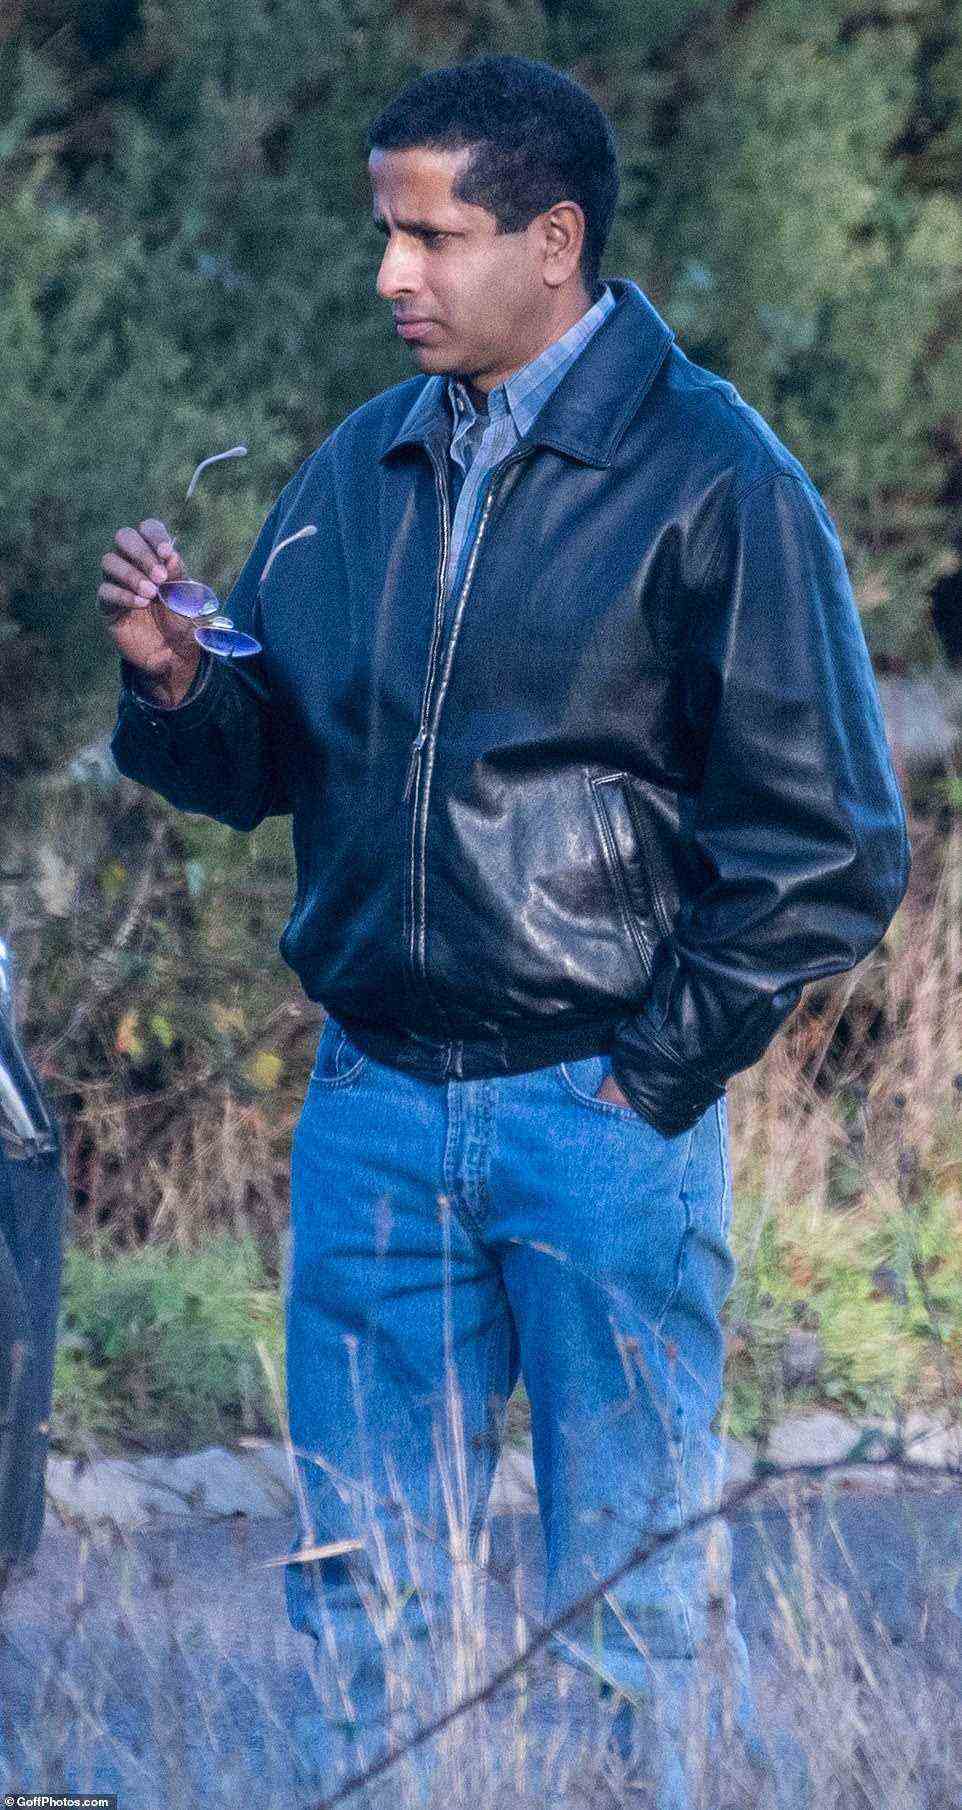 The actor could be seen holding similar glasses to those worn by Bashir, donning a leather jacket, medium-wash denim jeans and a matching denim shirt